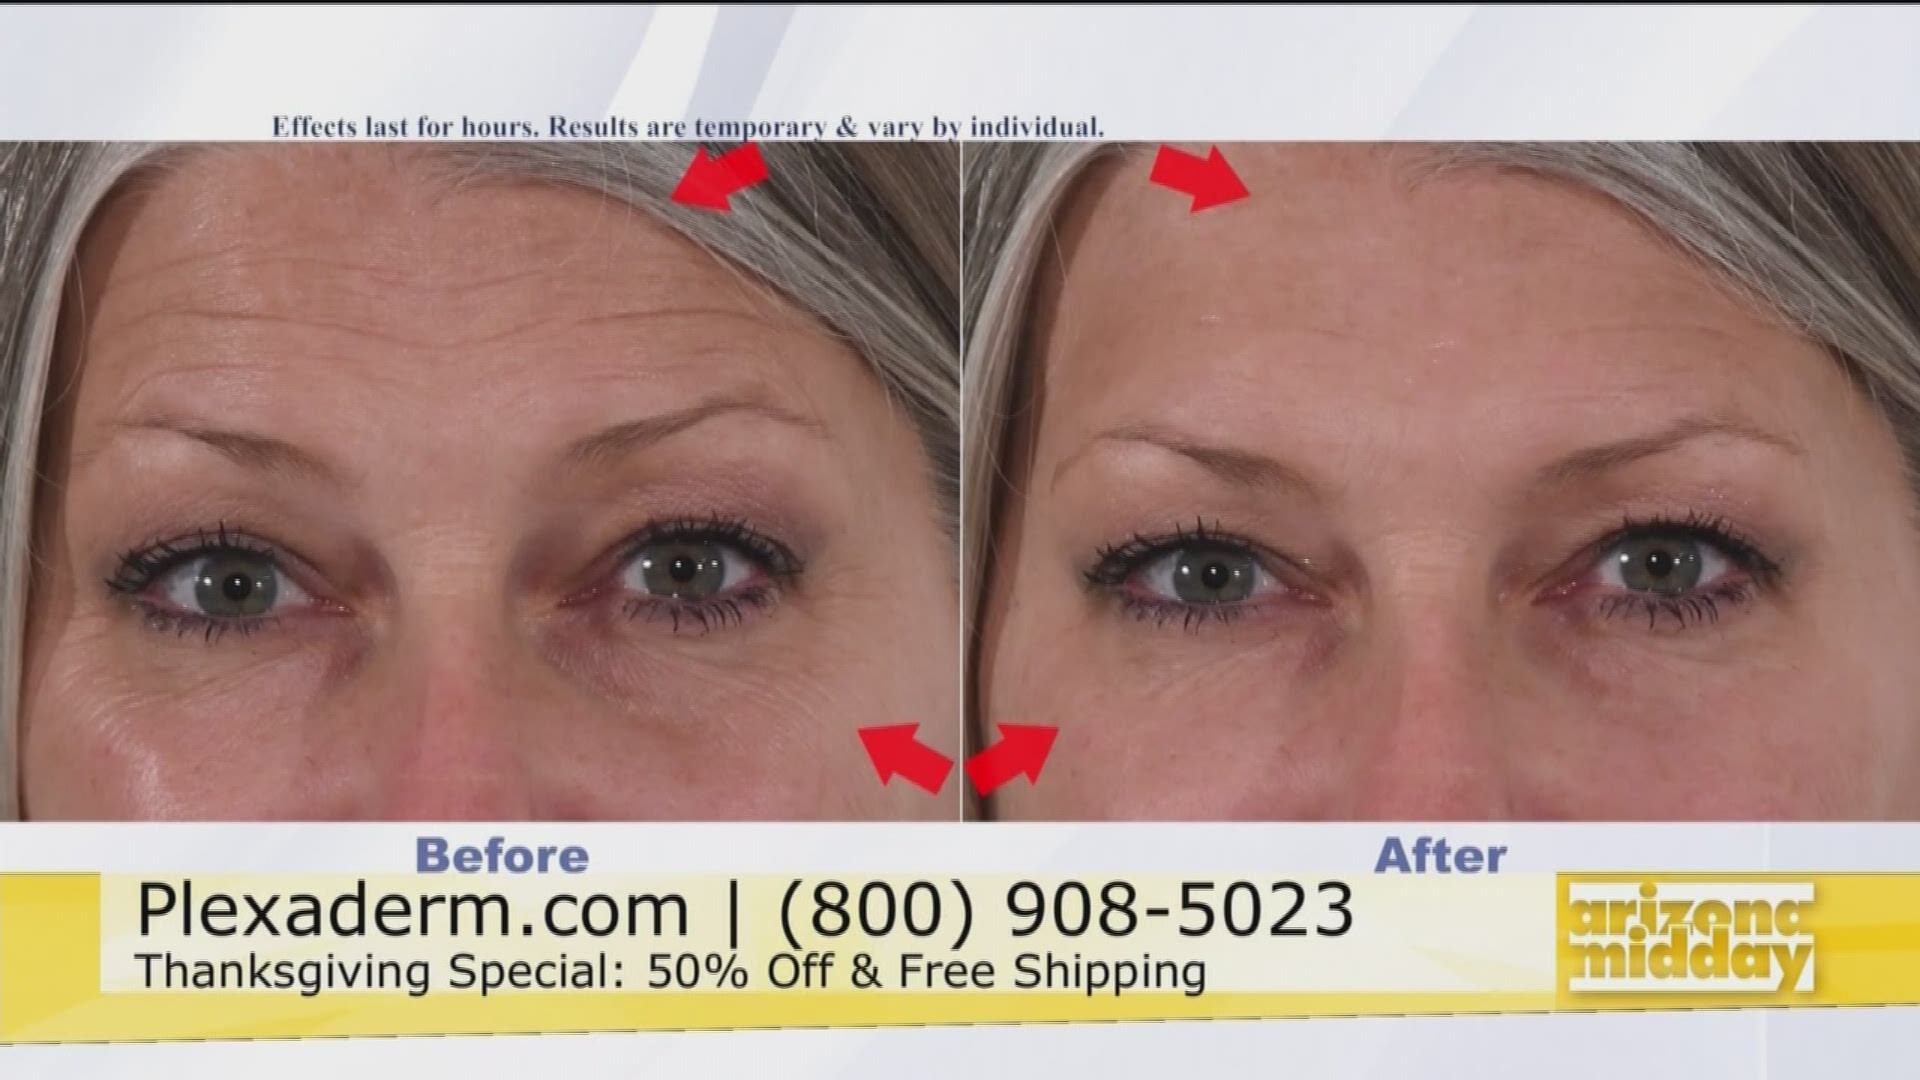 Look Younger In Minutes for the Holidays with Plexaderm